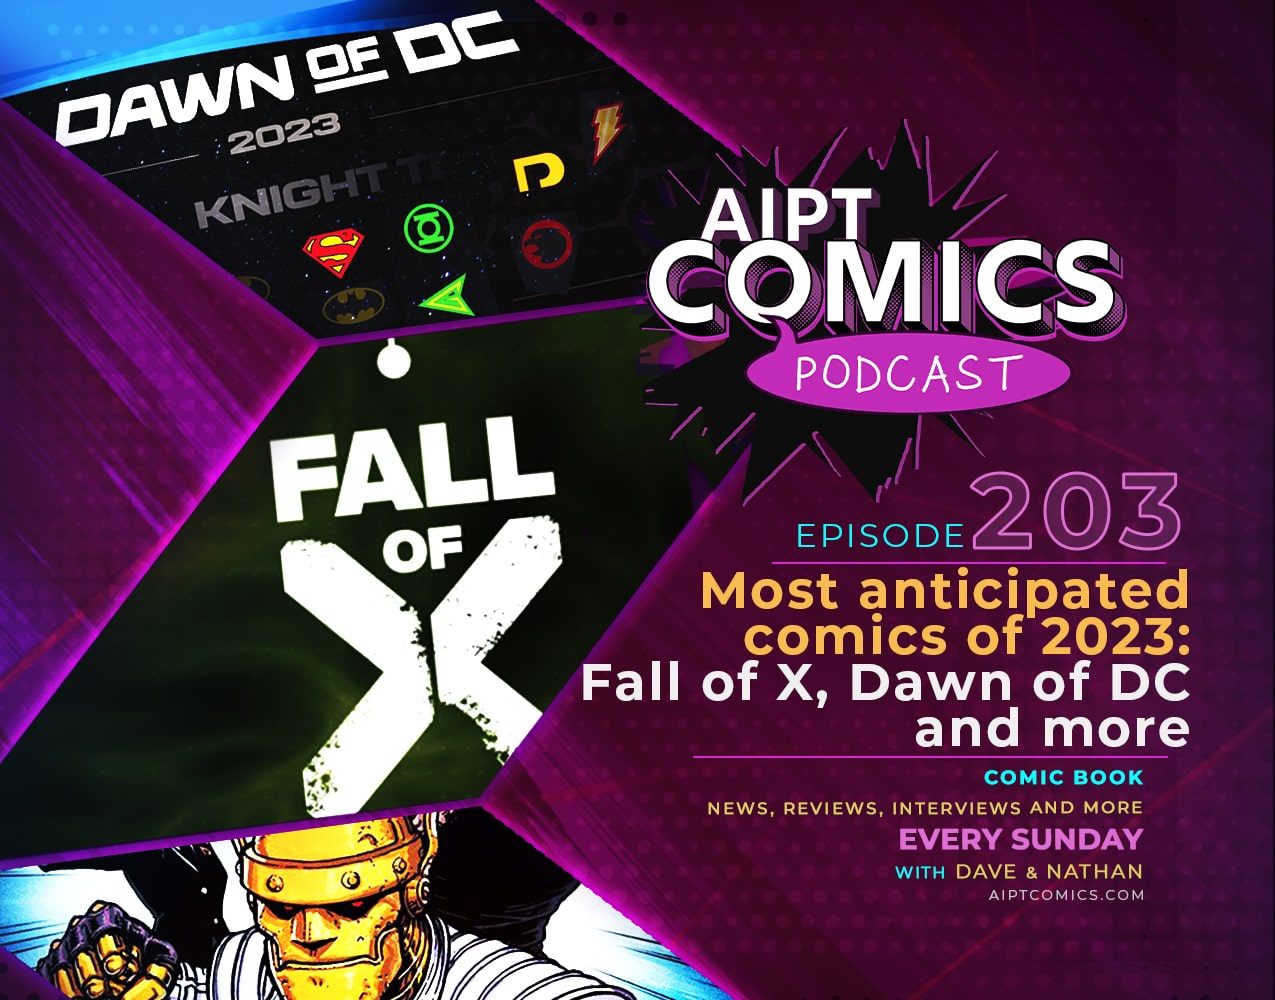 AIPT Comics Podcast episode 203: Most anticipated comic books of 2023: Fall of X, Dawn of DC and more